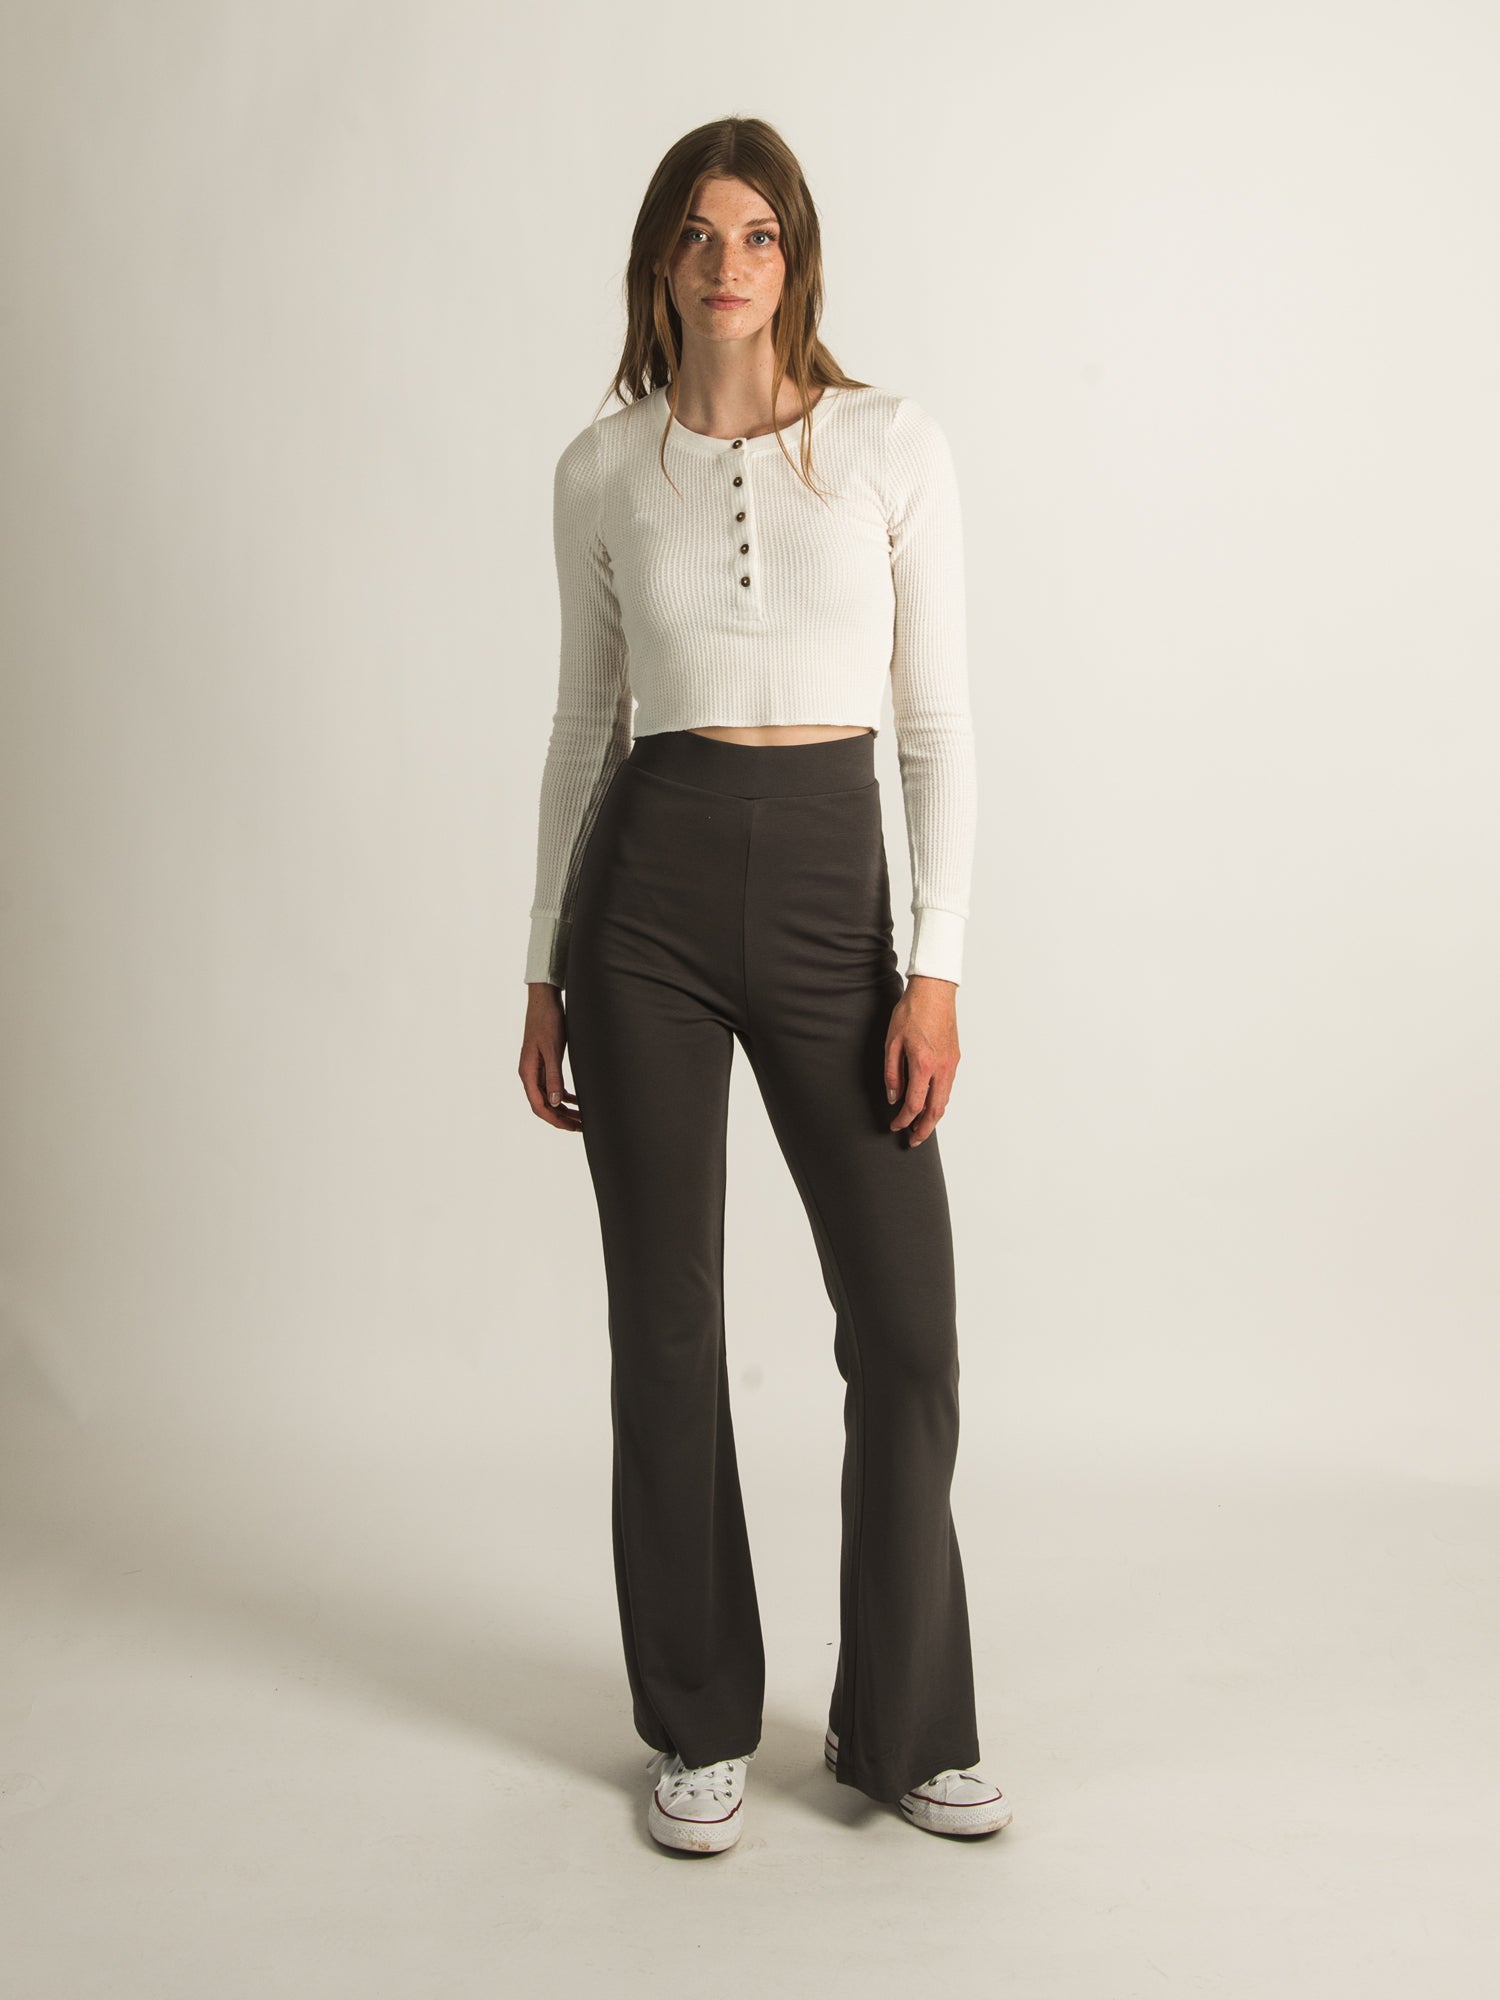 HARLOW HIGH RISE VEGAN LEATHER PANTS - CLEARANCE